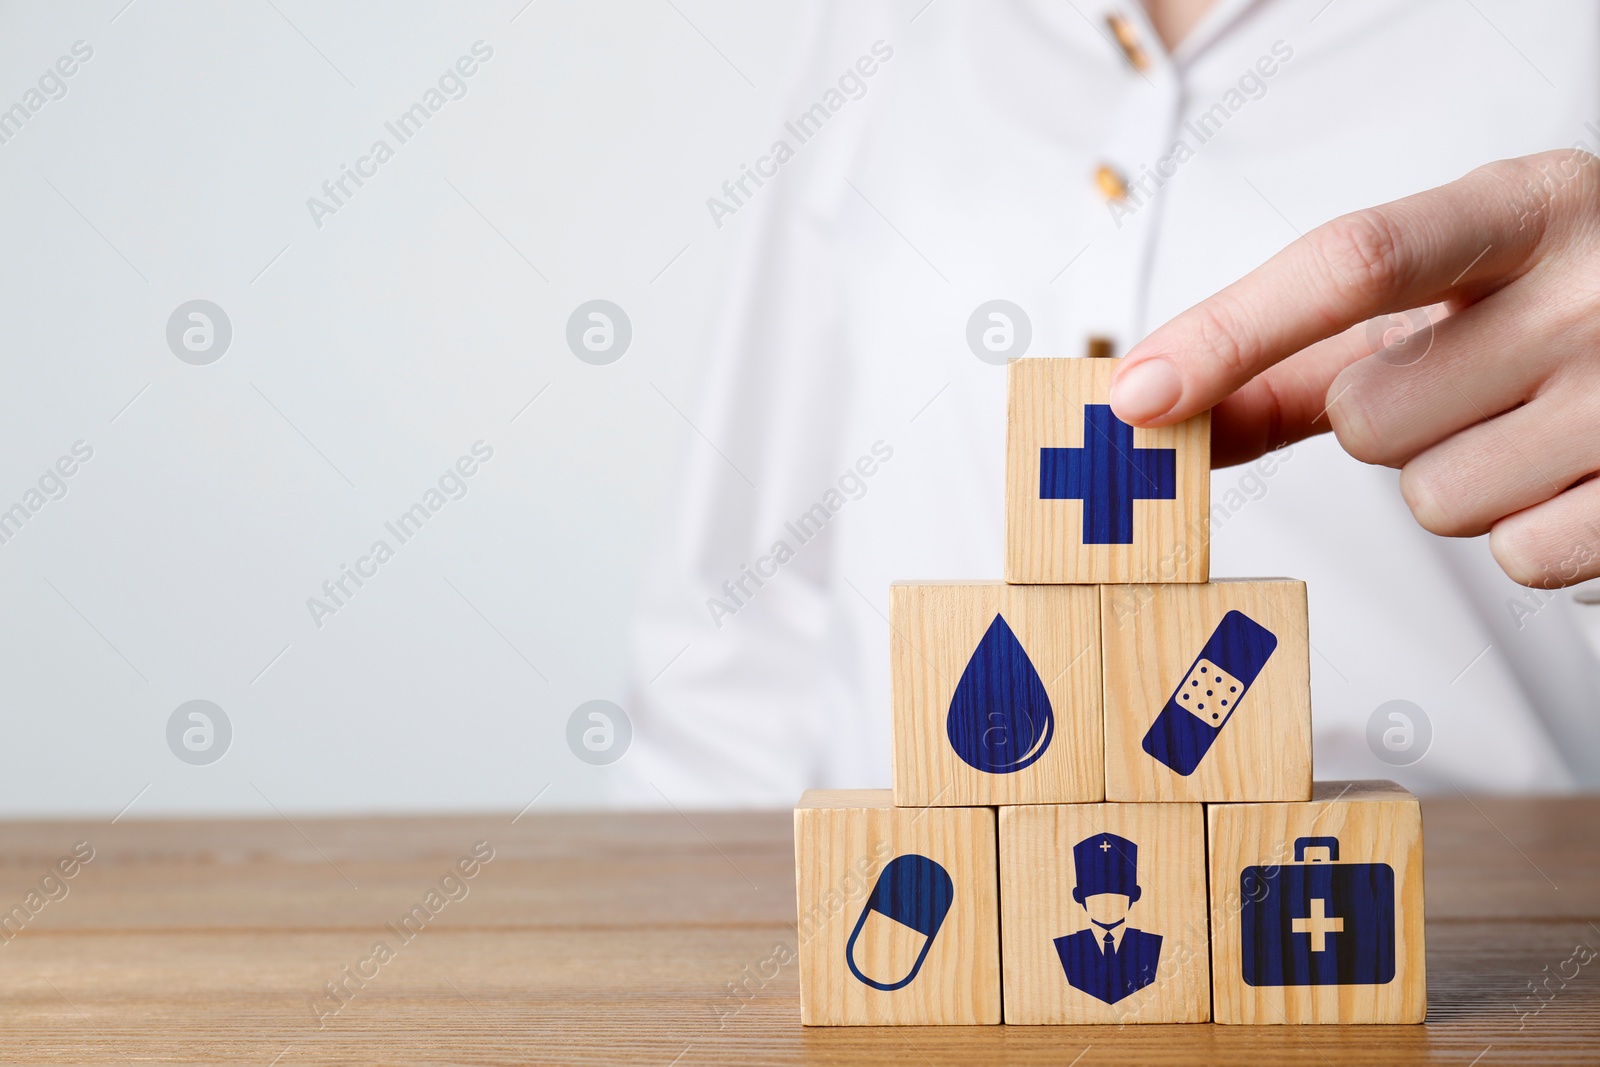 Image of Woman building pyramid of cubes with different icons on wooden table against light background, closeup. Insurance concept